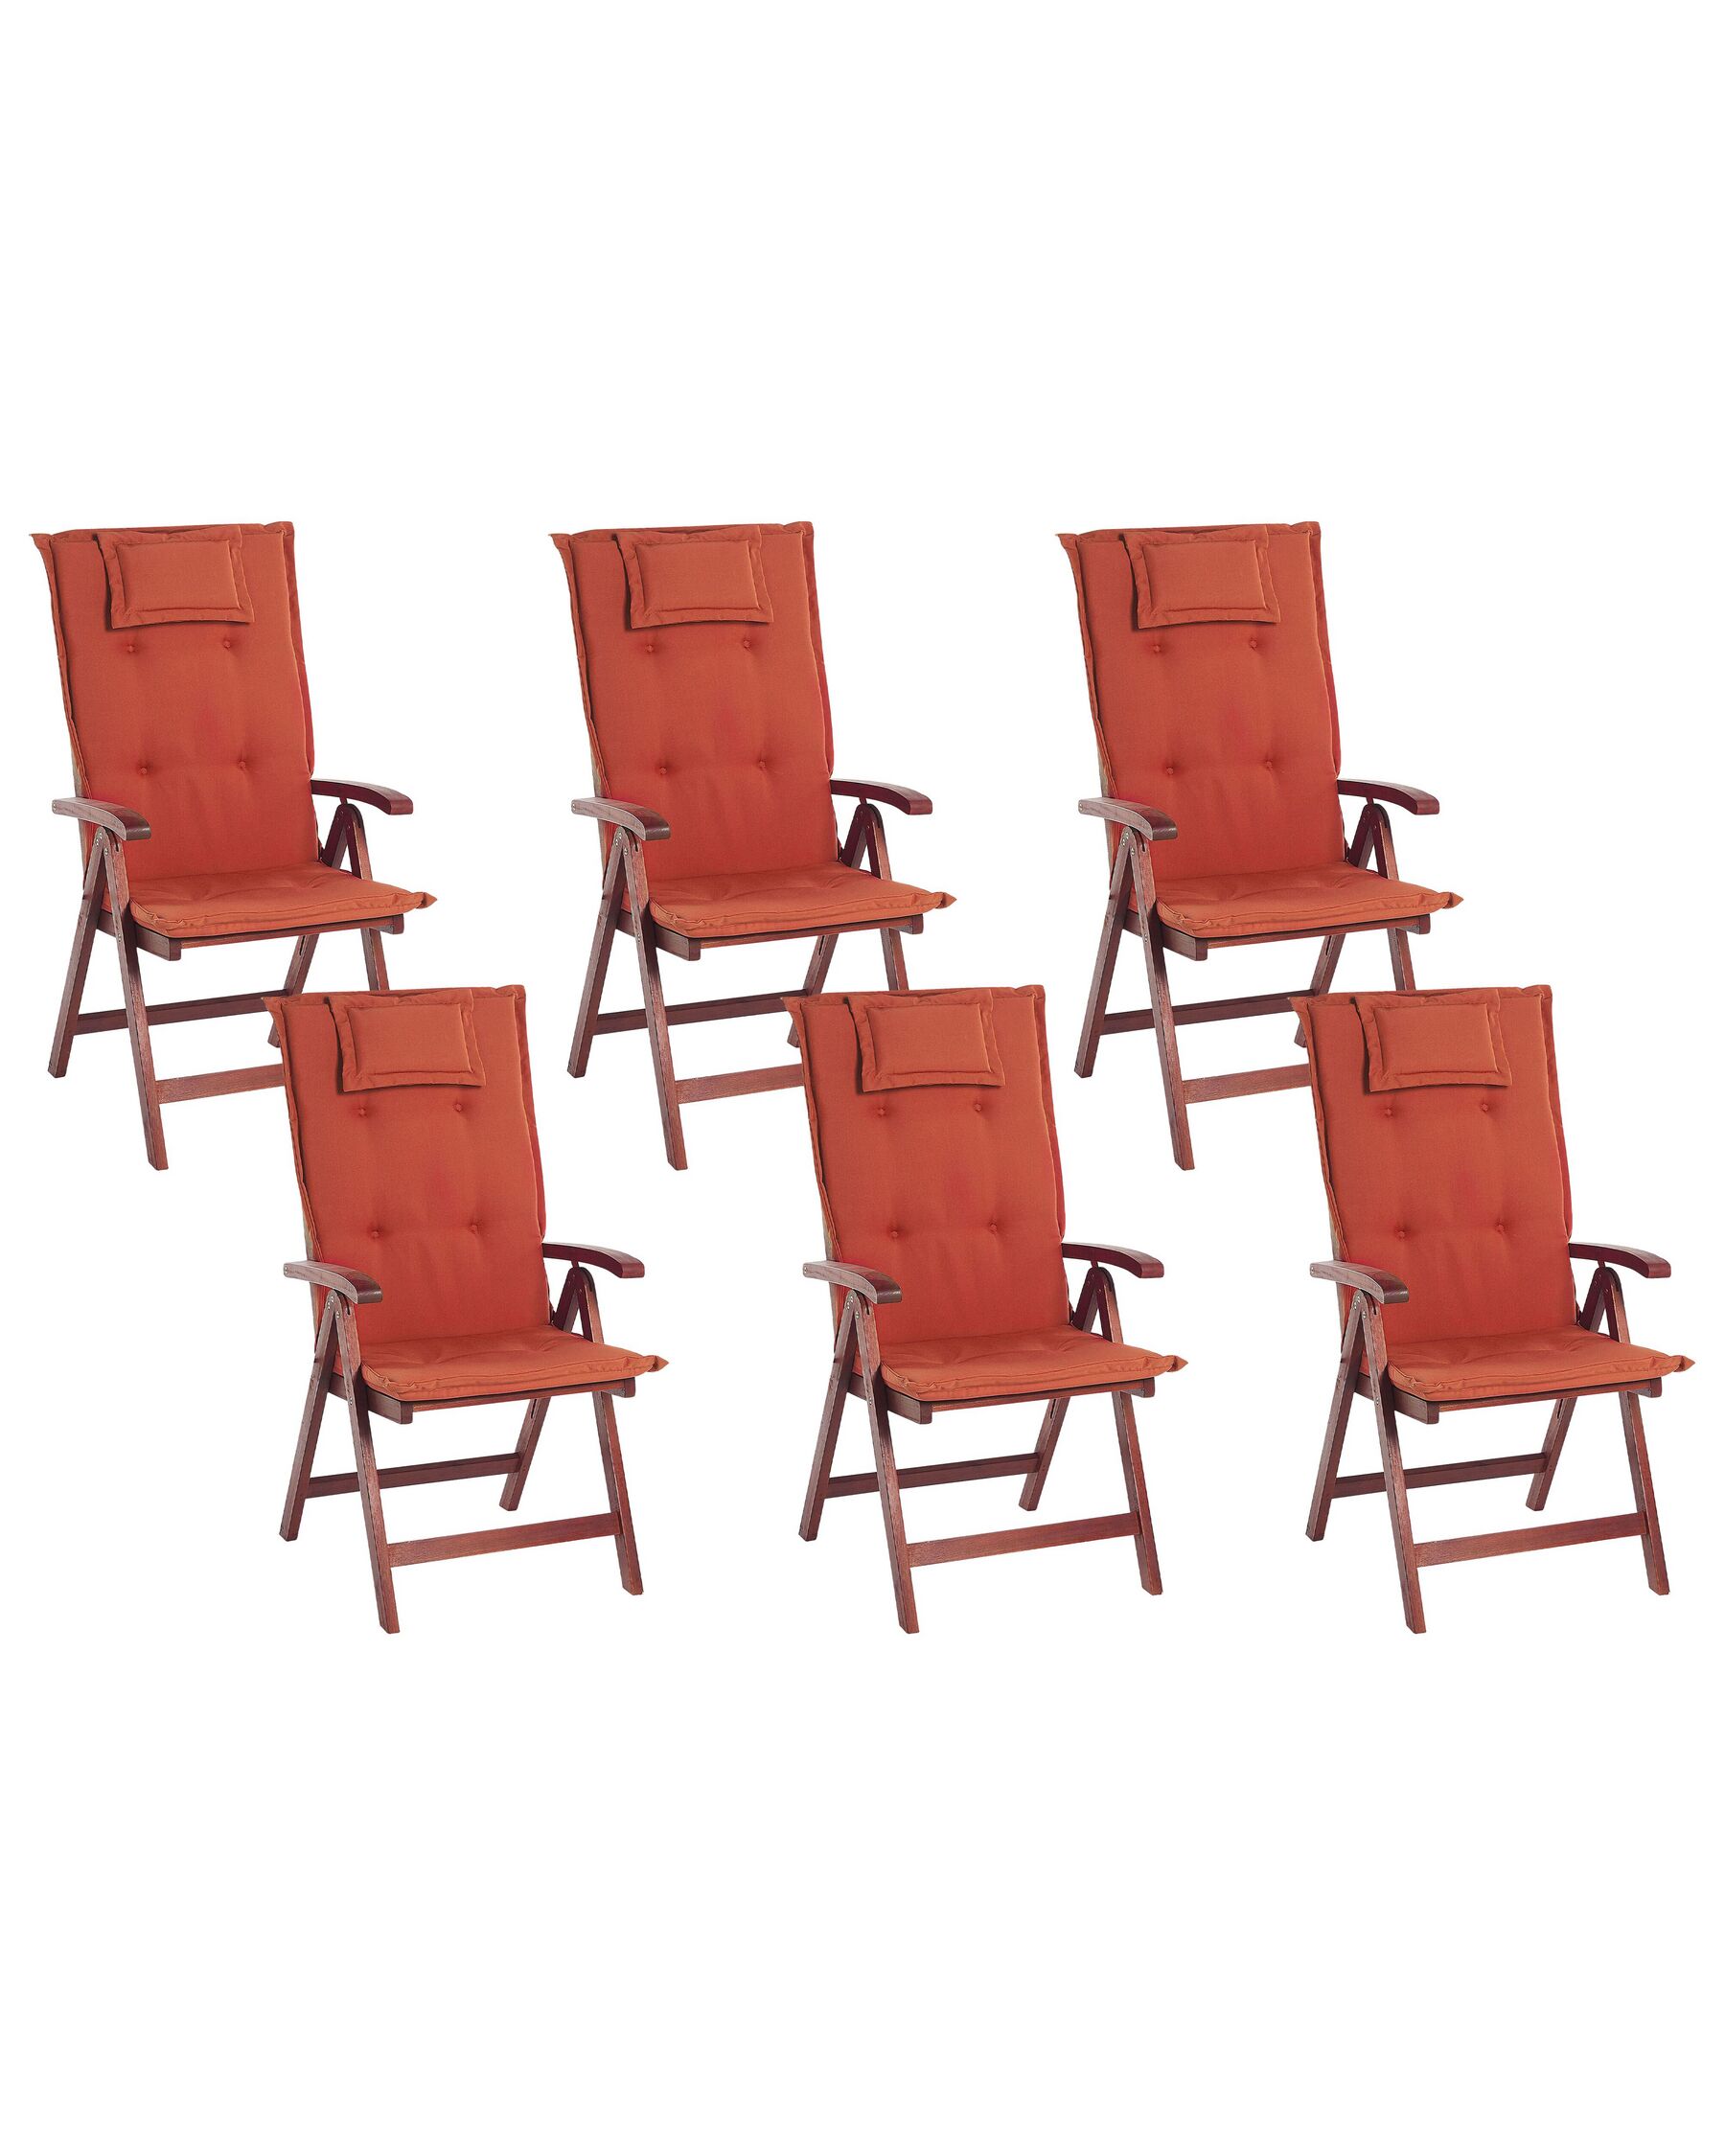 Set of 6 Acacia Garden Folding Chairs with Red Cushions TOSCANA_783978